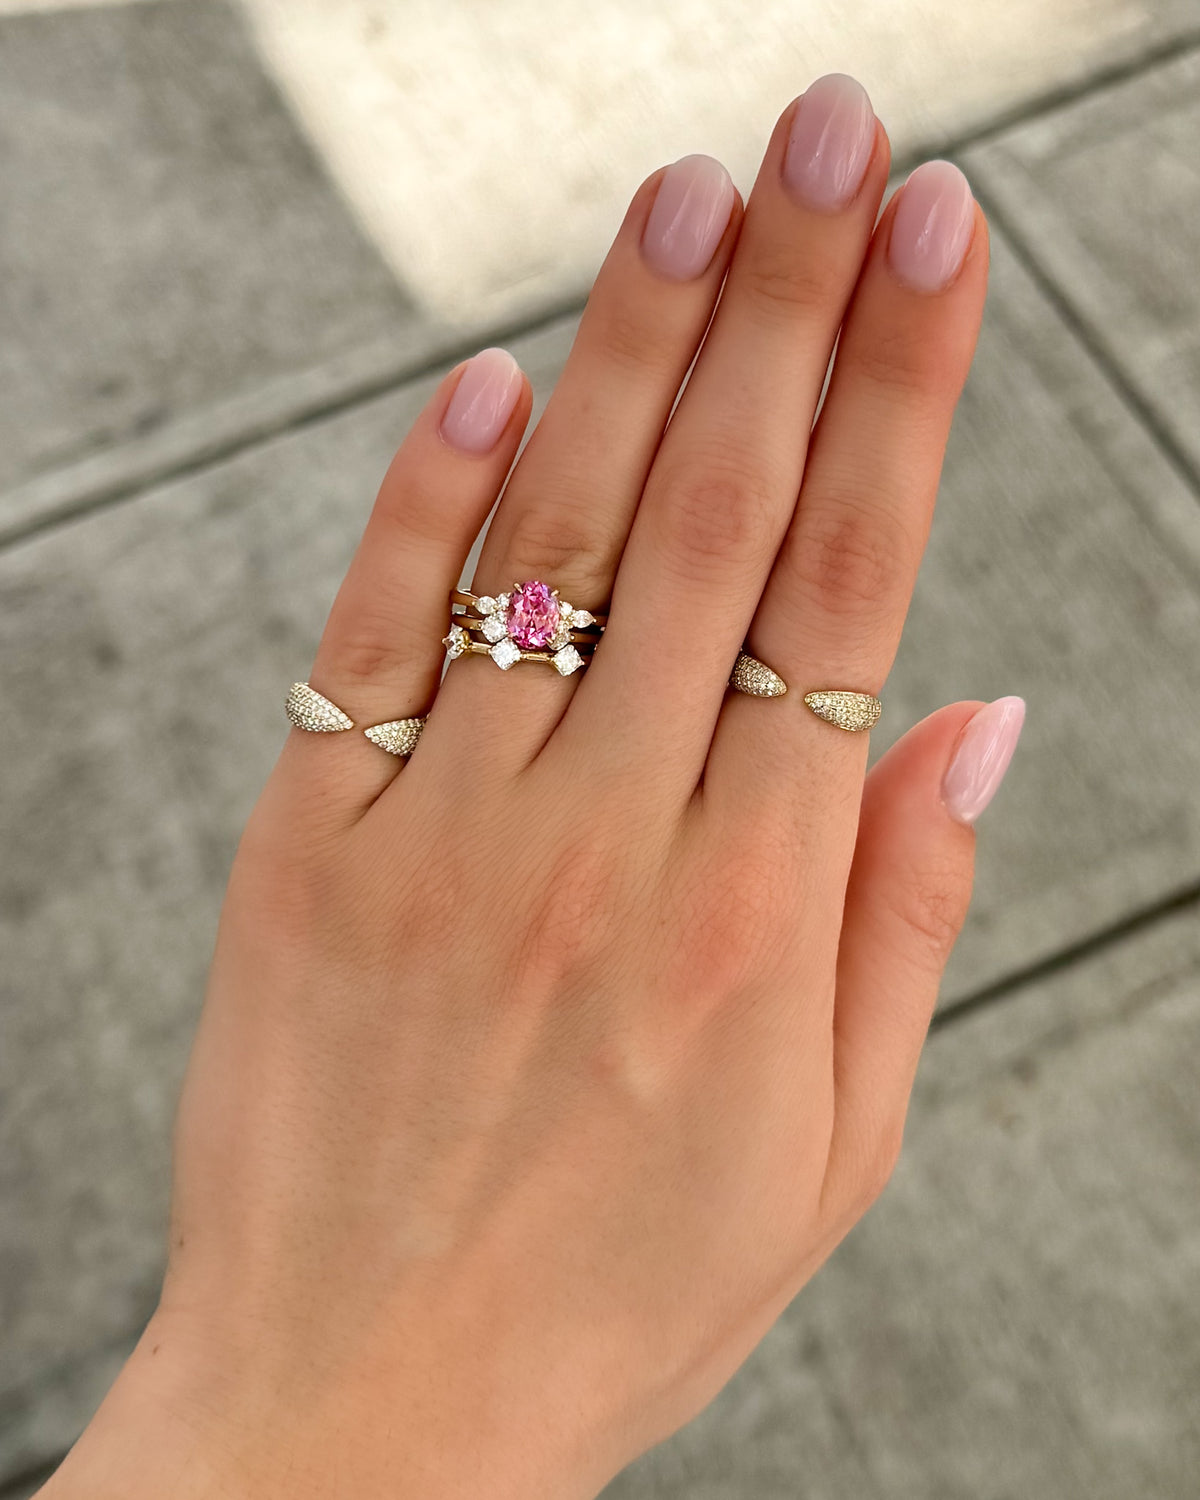 Bella Engagement Ring With Oval Cut Pink Sapphire